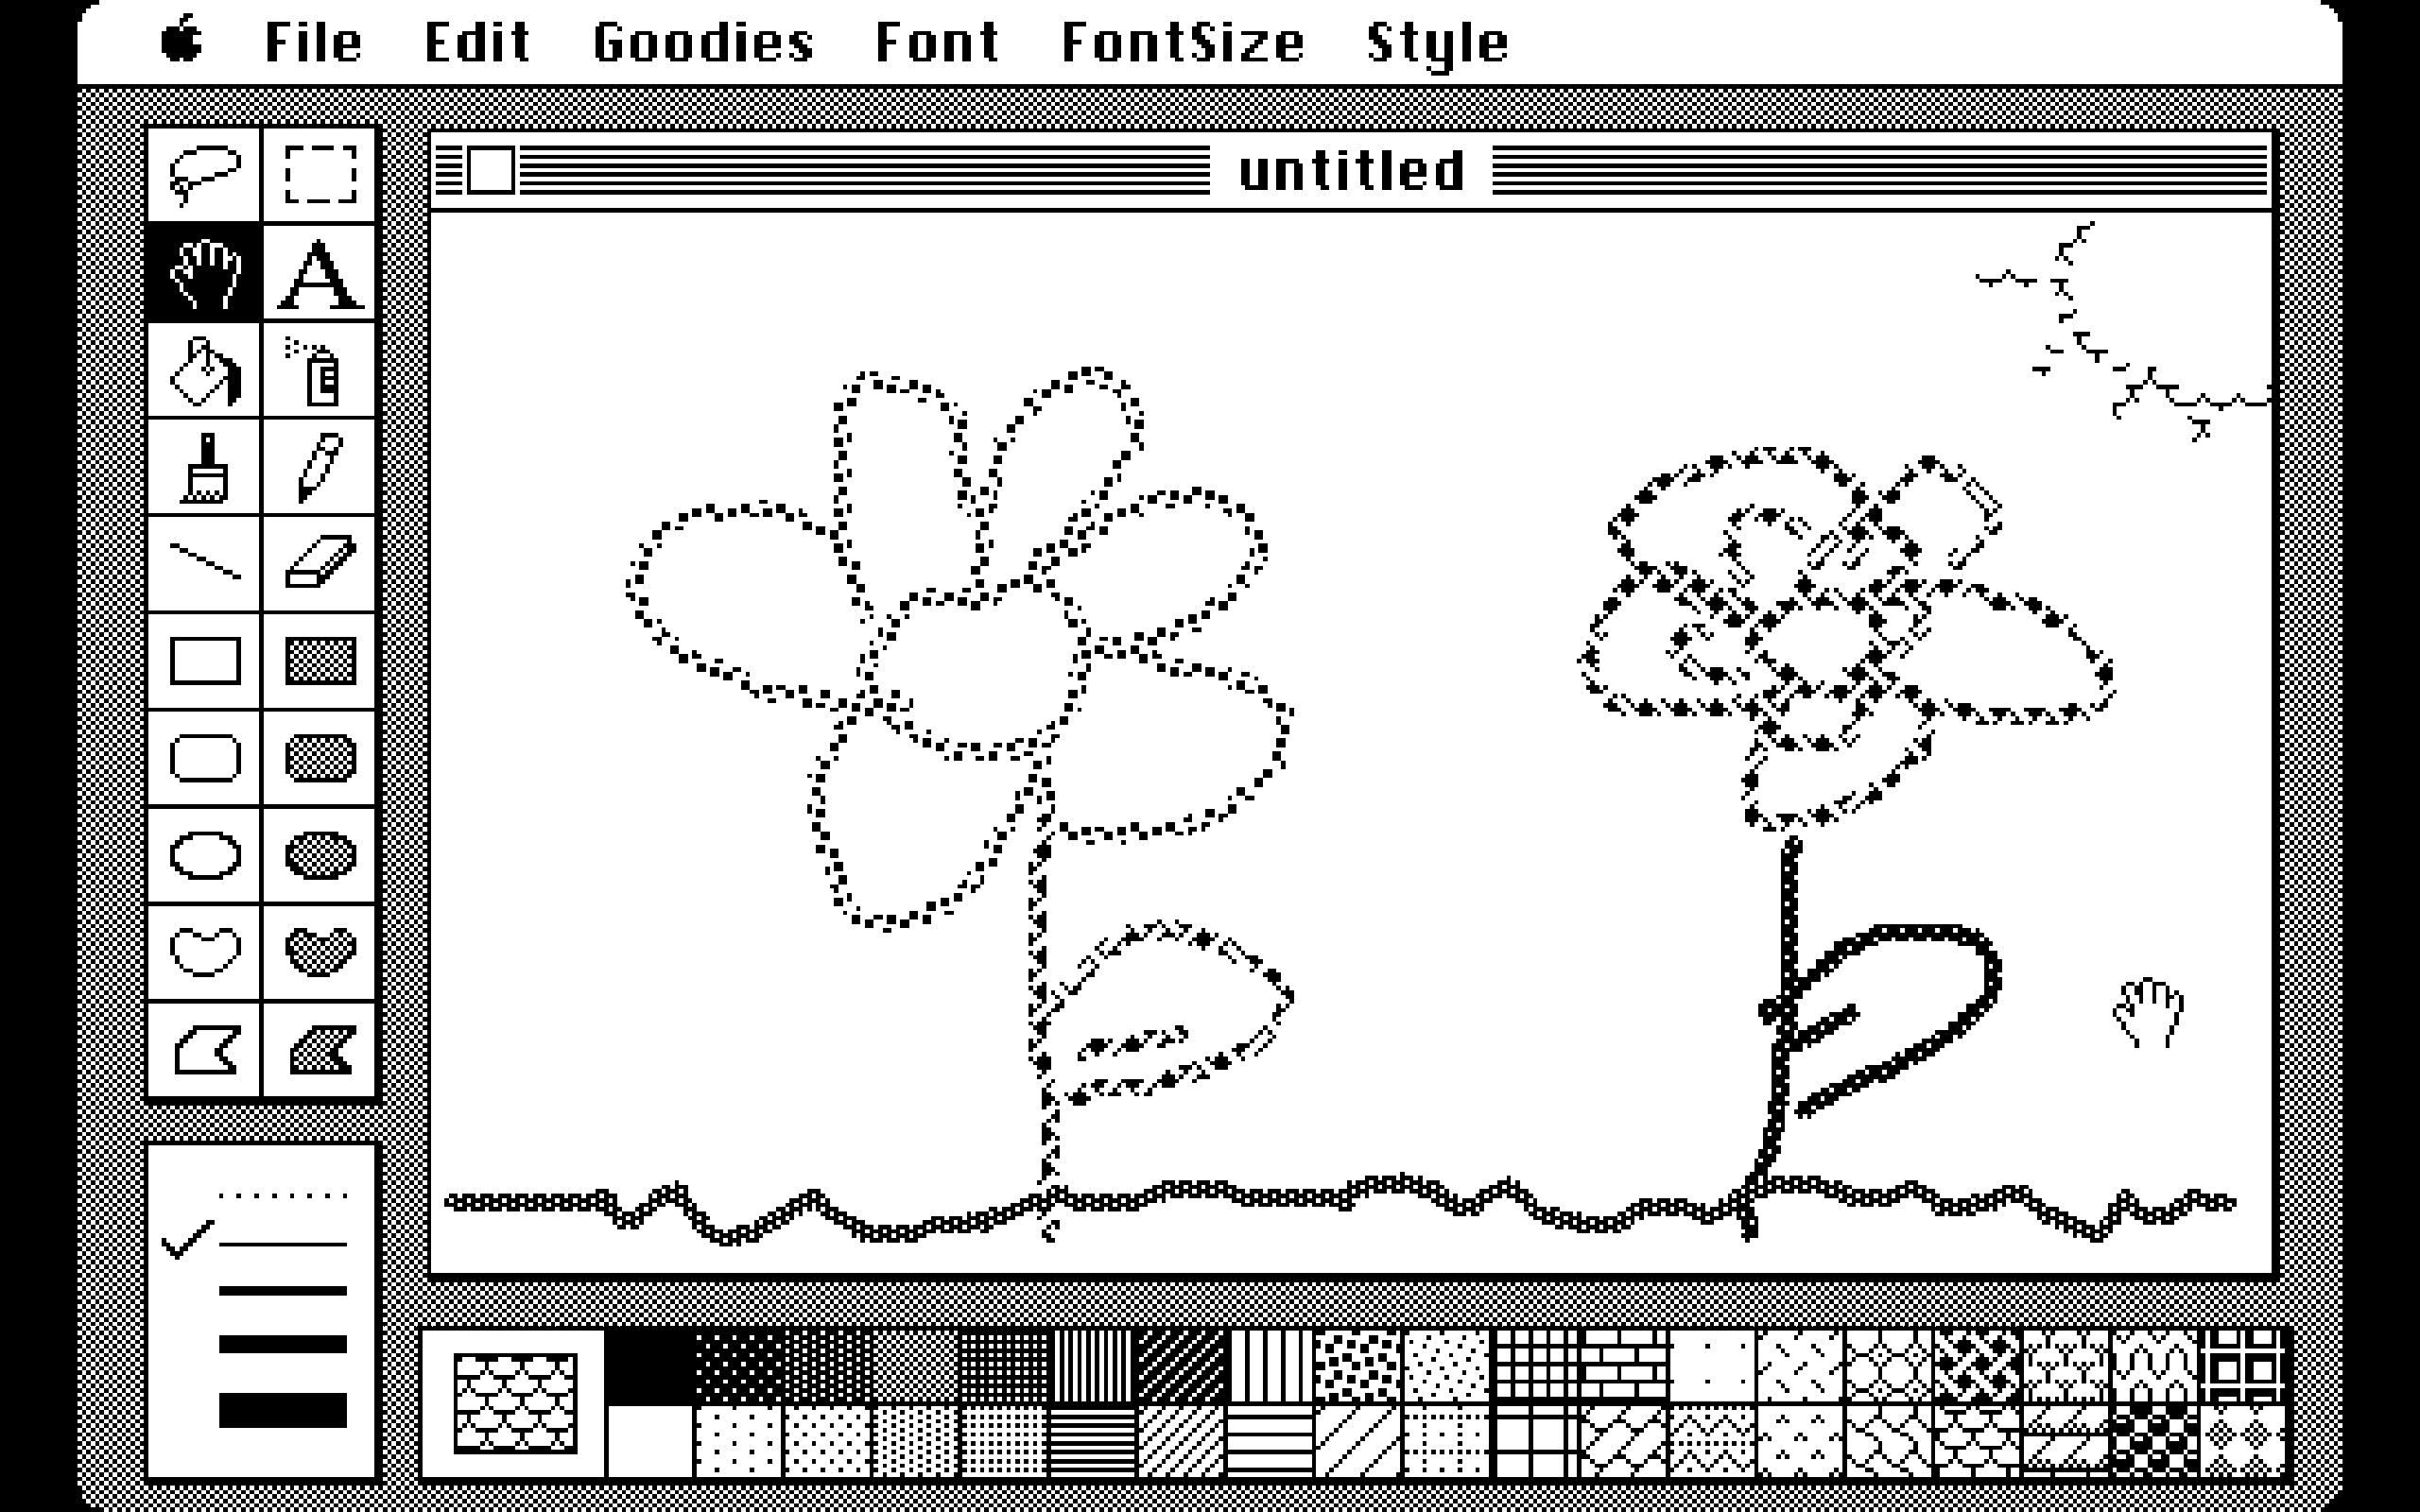 MacPaint drawing of two flowers under the sun.